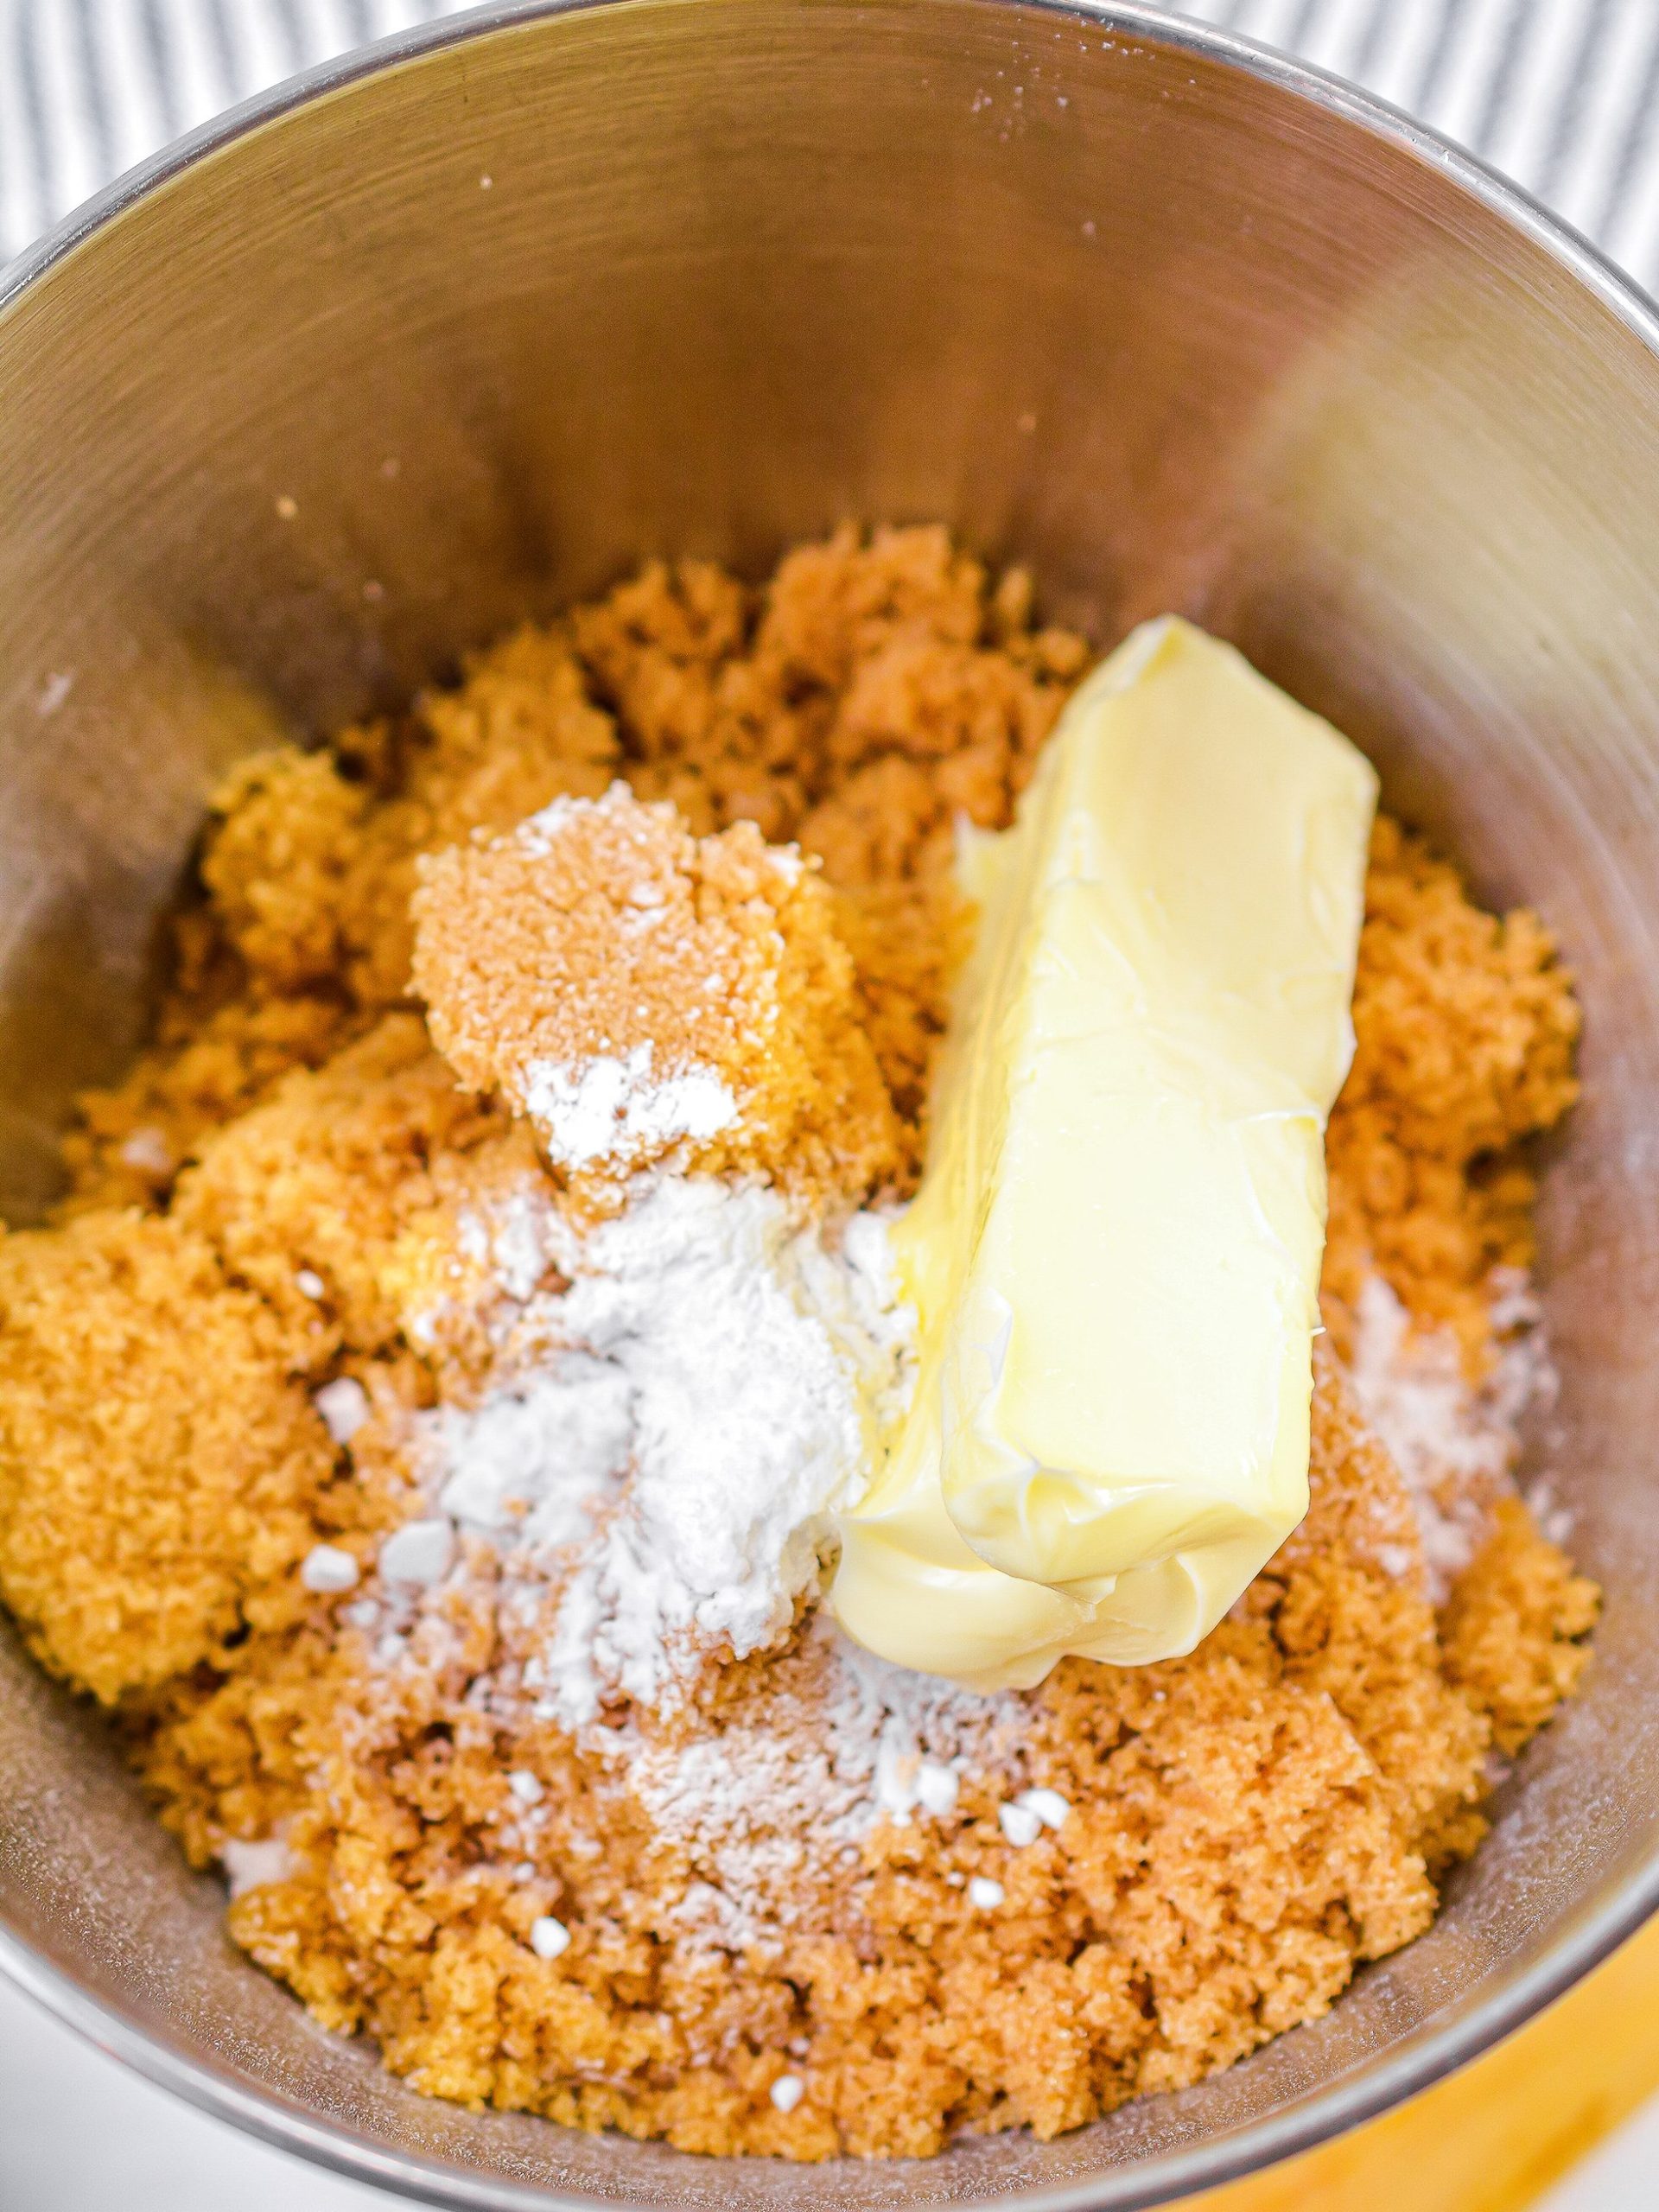 add ½ cup of butter softened and ½ tsp of baking soda.